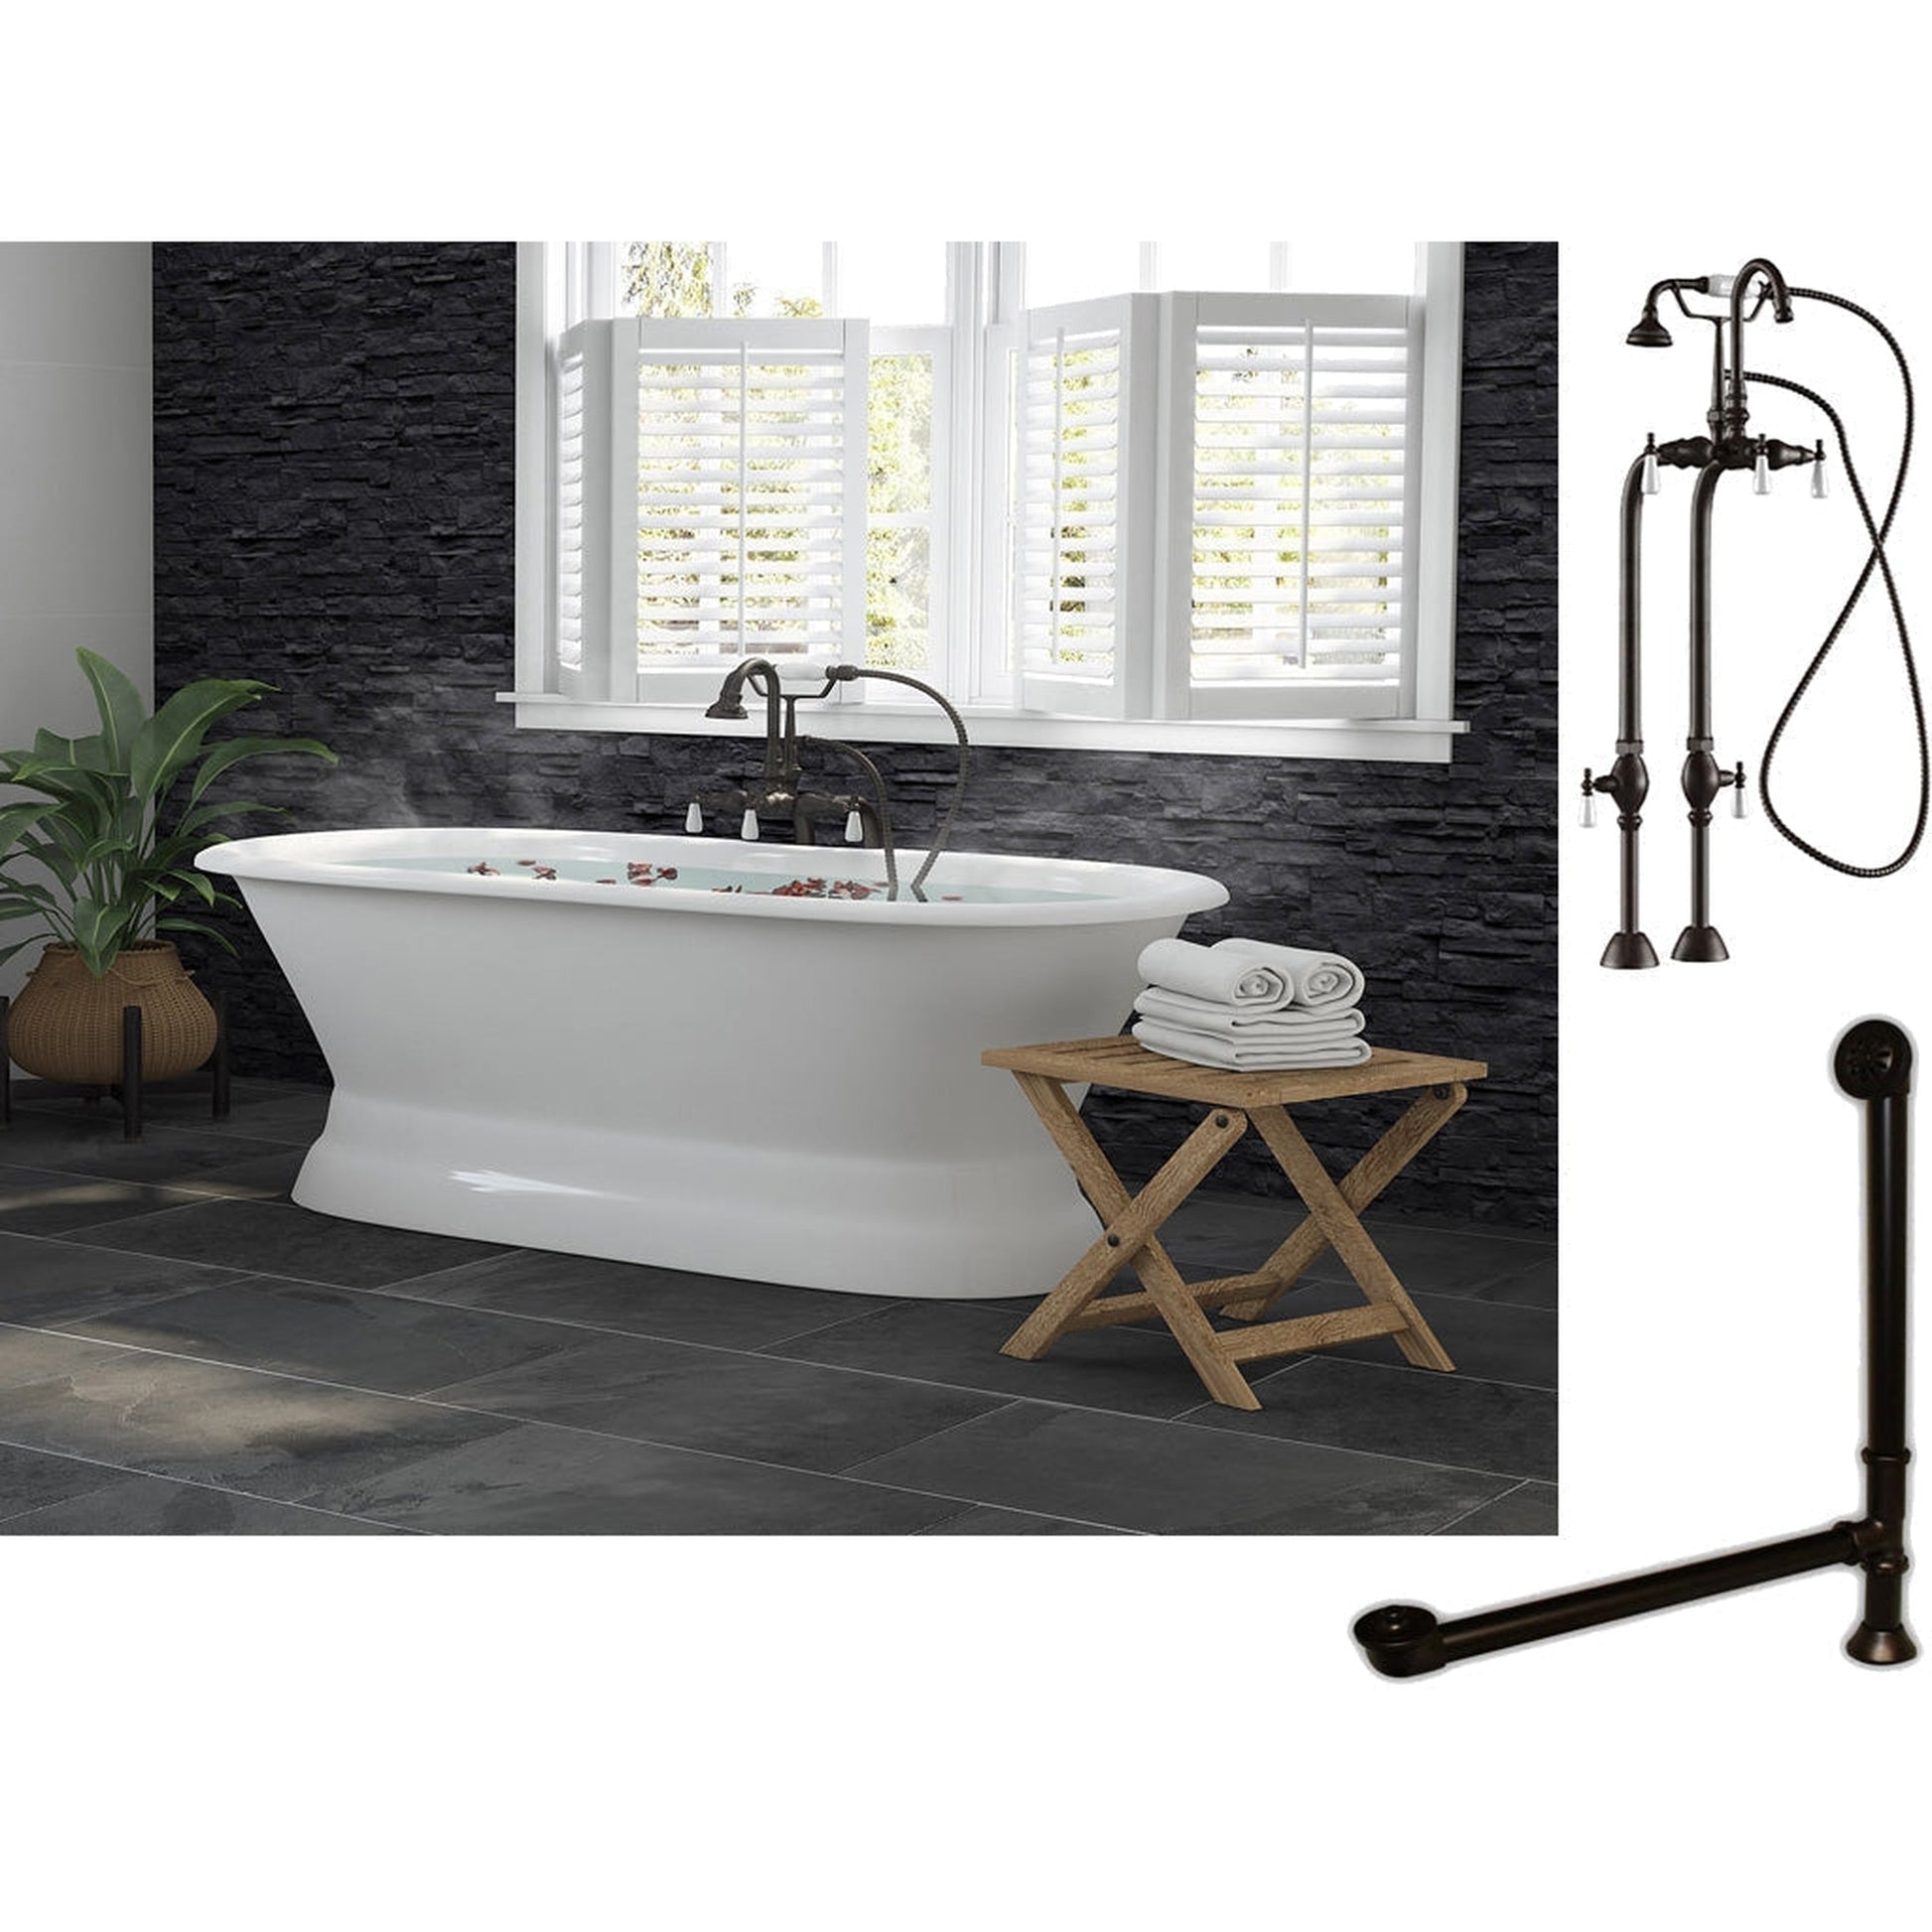 Cambridge Plumbing 60" White Cast Iron Double Ended Pedestal Bathtub With No Deck Holes And Complete Plumbing Package Including Freestanding English Telephone Gooseneck Faucet, Drain And Overflow Assembly In Oil Rubbed Bronze